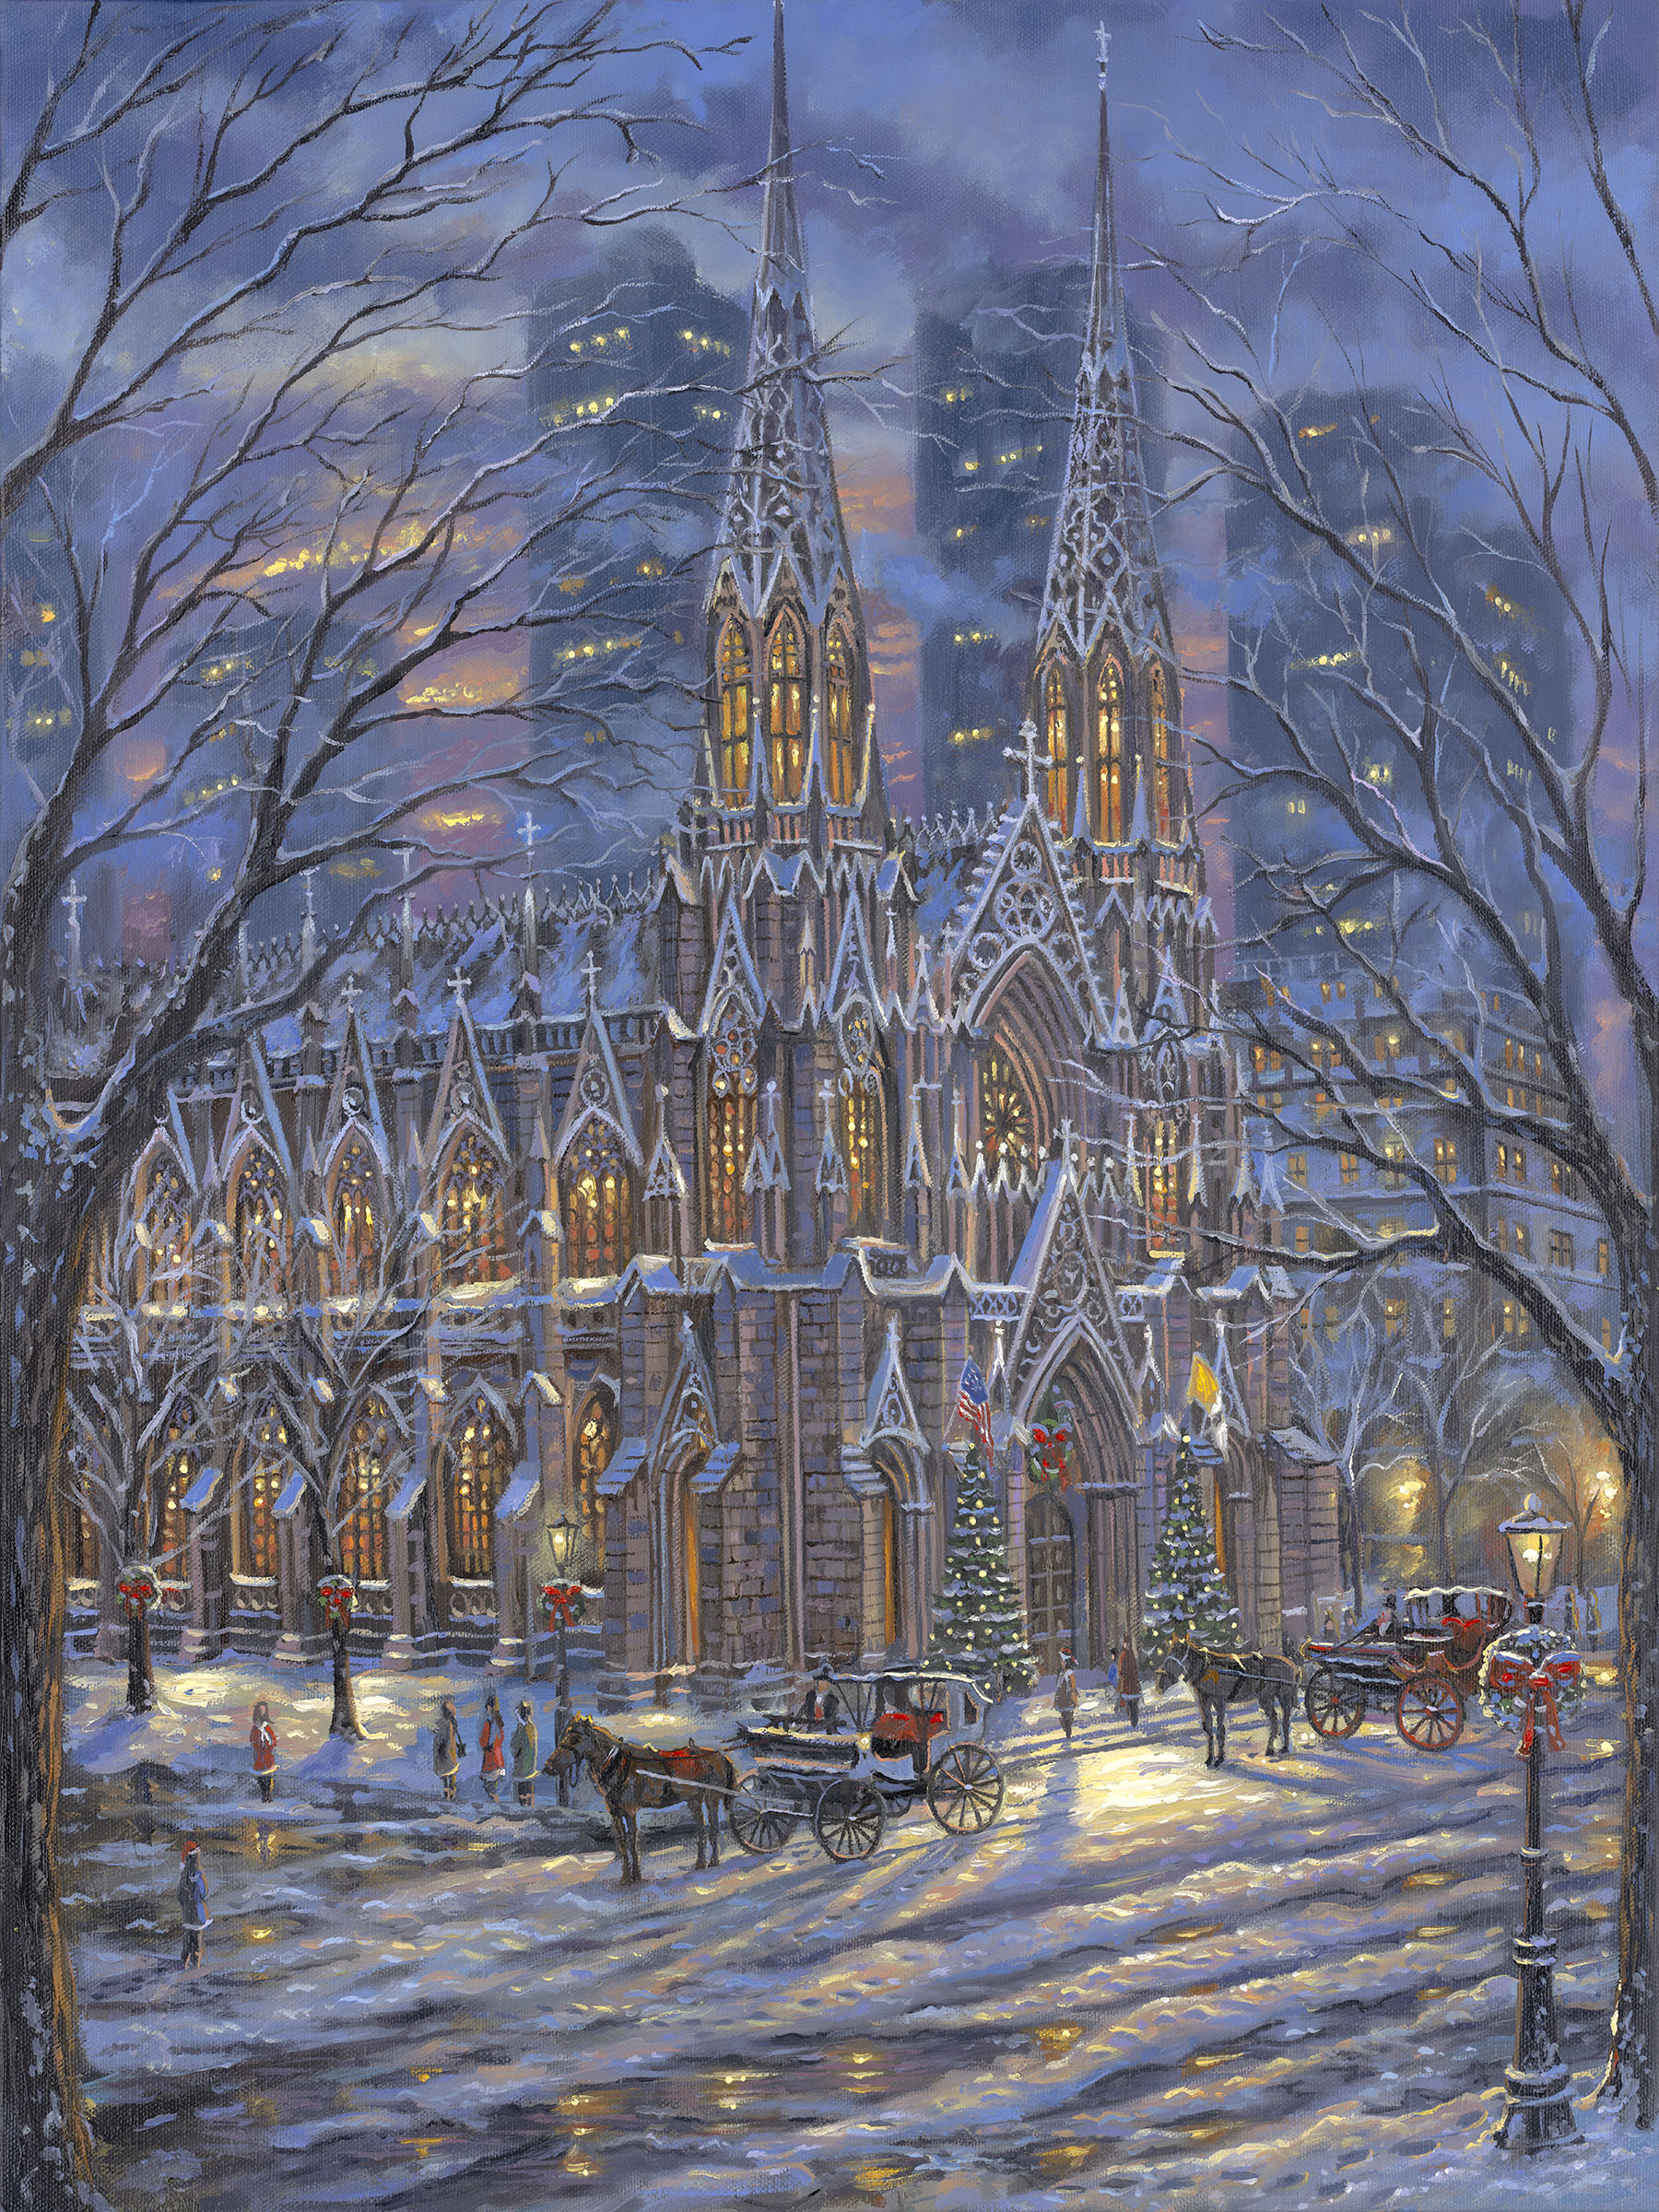 St. Patrick's Cathedral (New York) by Robert Finale